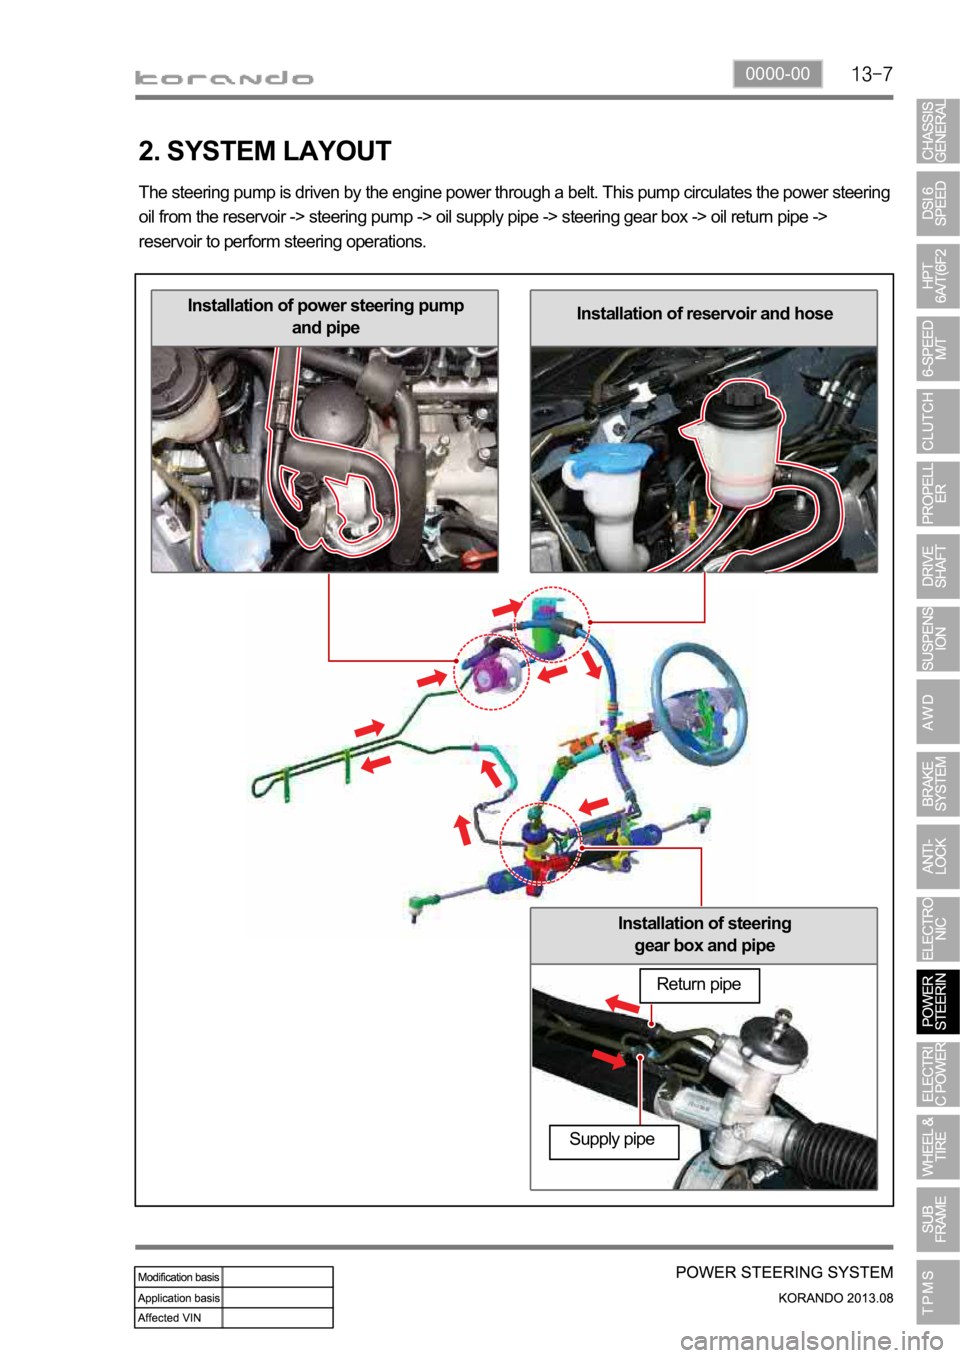 SSANGYONG KORANDO 2013 Repair Manual 0000-00
Installation of steering 
gear box and pipe
Installation of reservoir and hoseInstallation of power steering pump
and pipe
2. SYSTEM LAYOUT
The steering pump is driven by the engine power thro